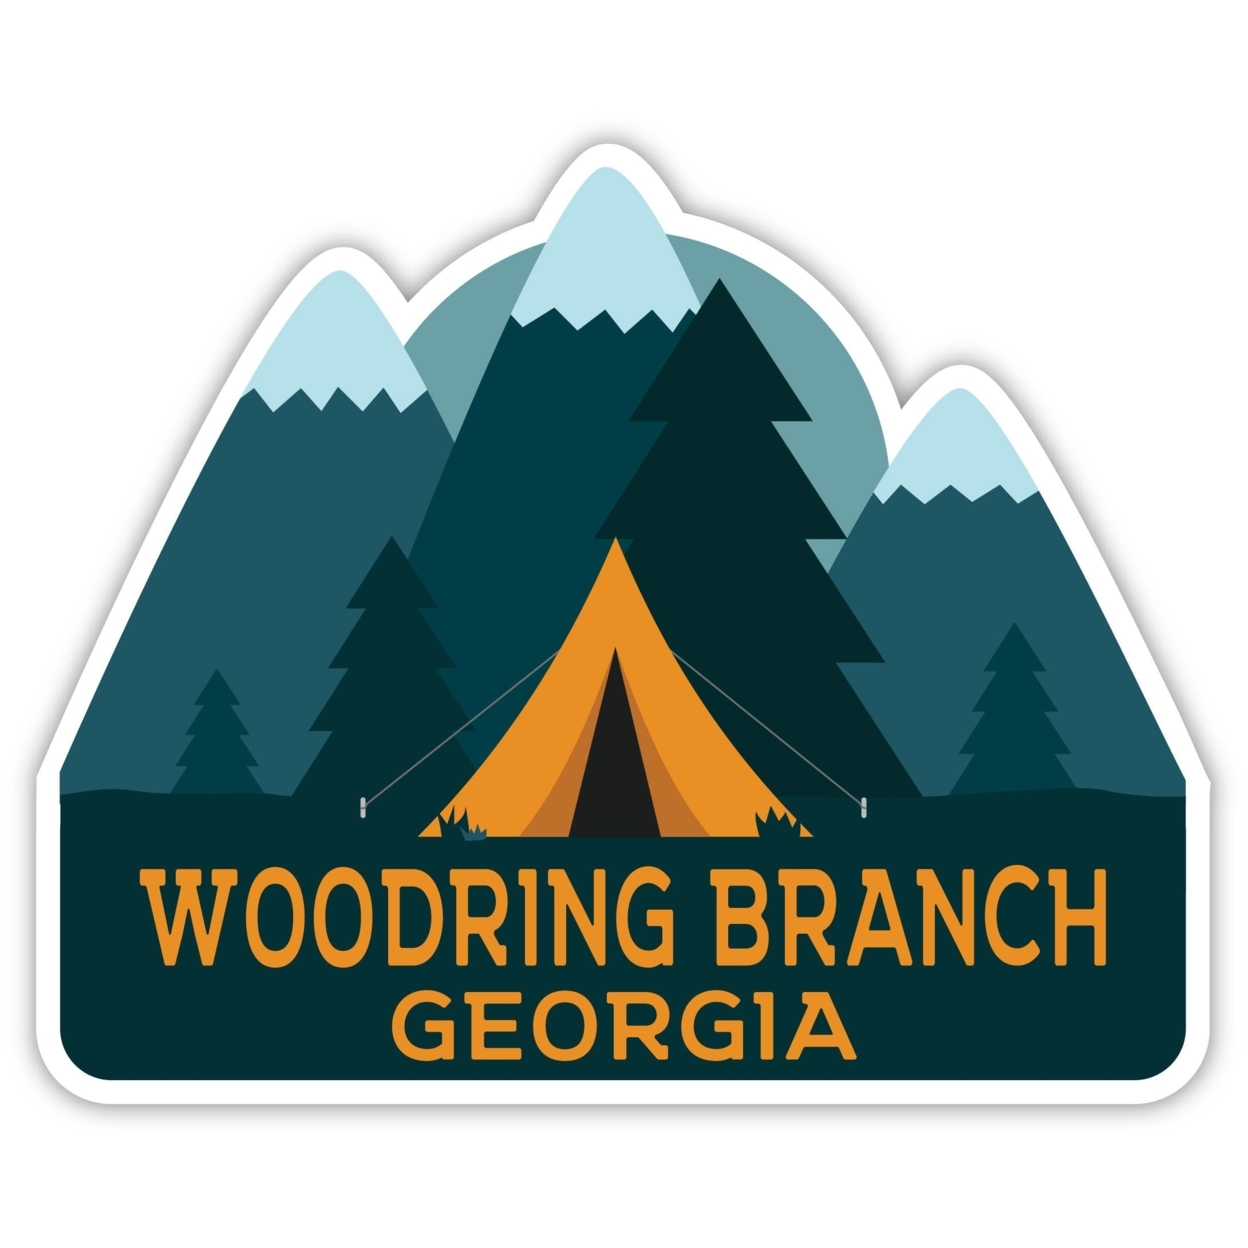 Woodring Branch Georgia Souvenir Decorative Stickers (Choose Theme And Size) - Single Unit, 4-Inch, Tent